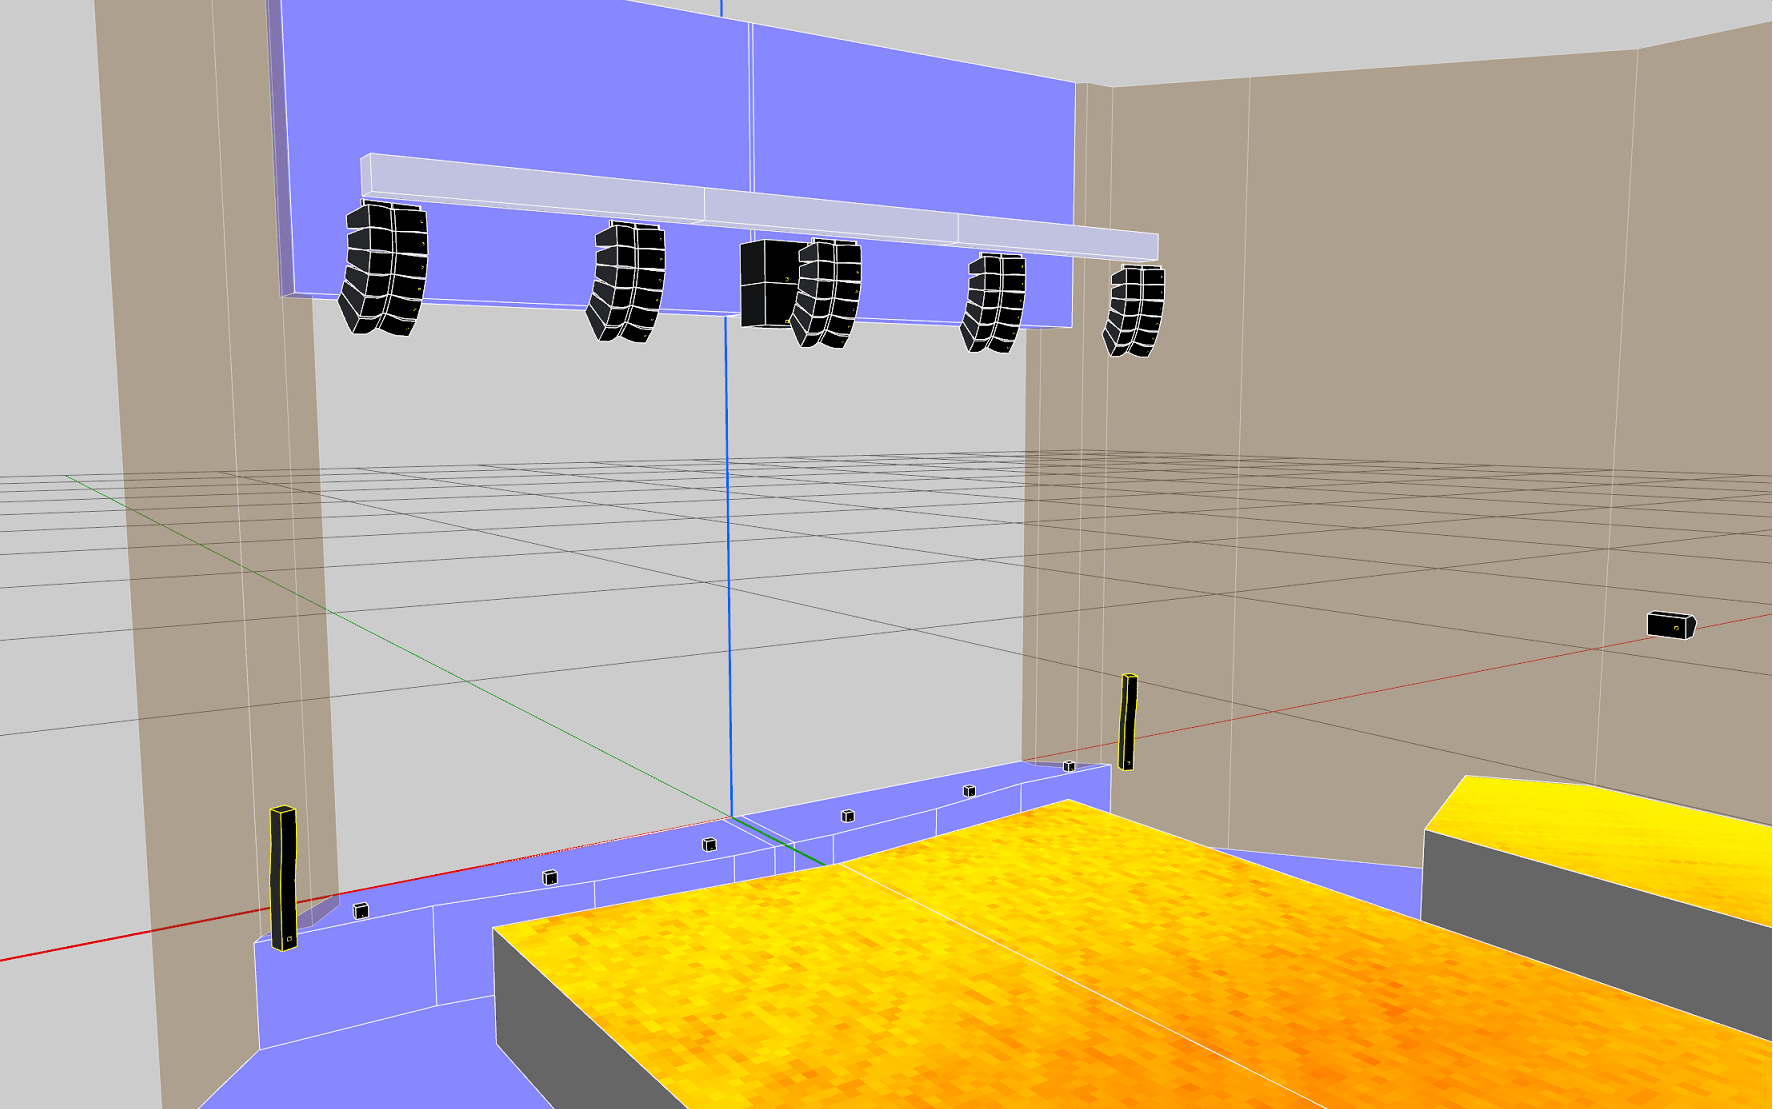 3D Model of sound system set up by L-Acoustics at the Kaufmann Concert Hall, New York